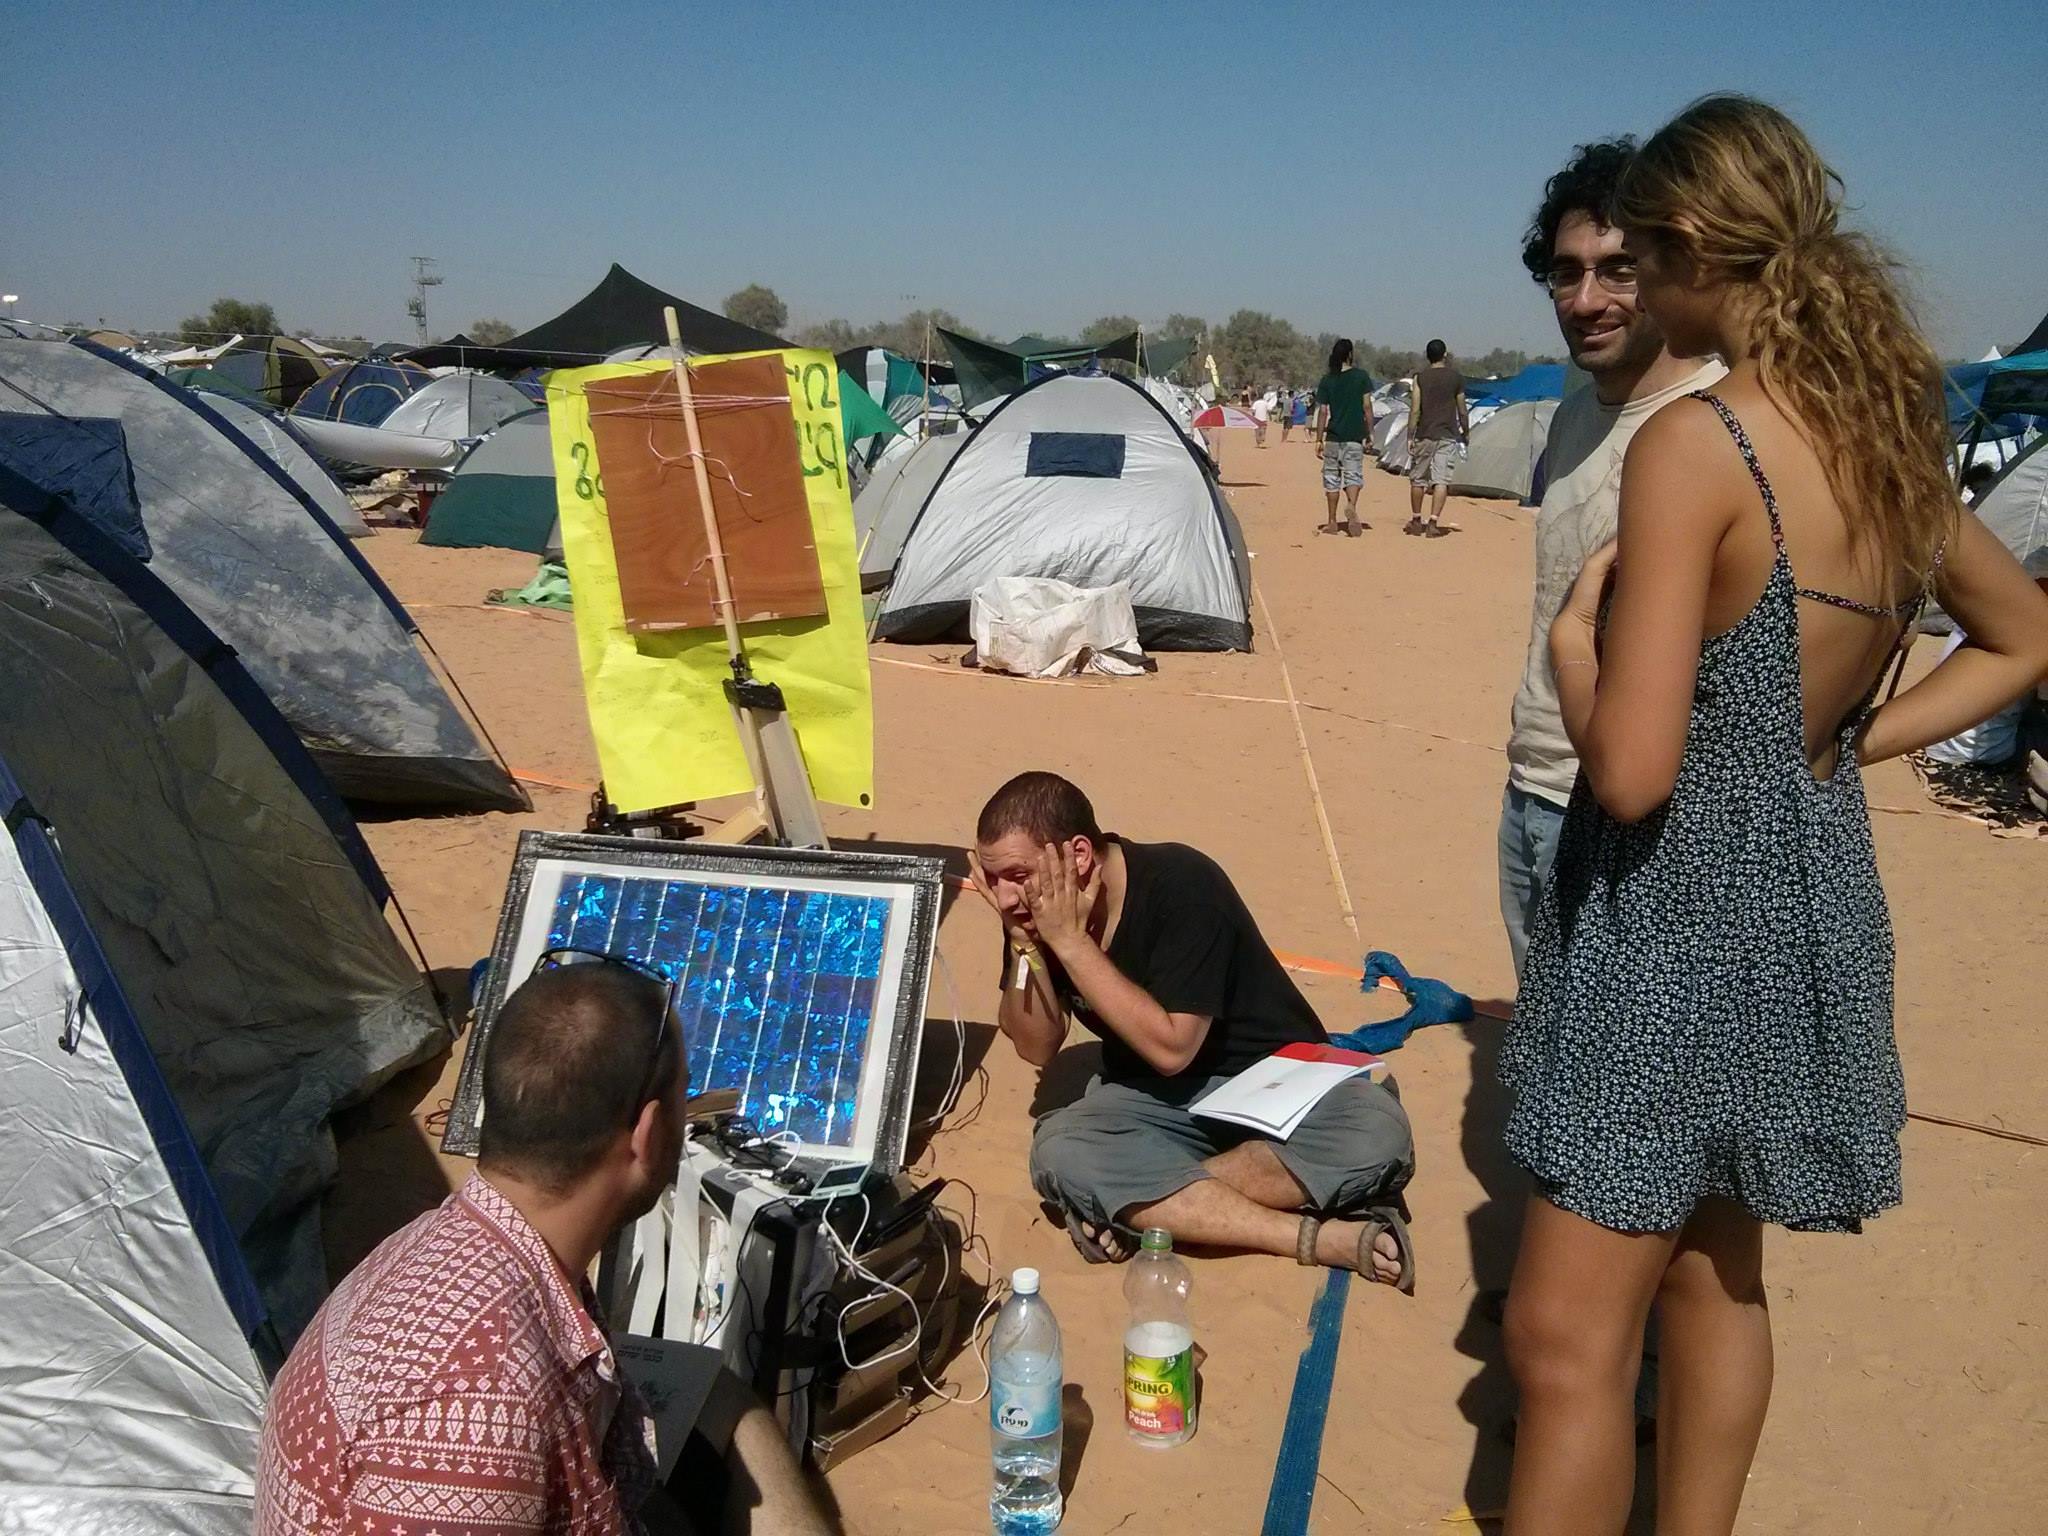 solar phone charging station - In the festival